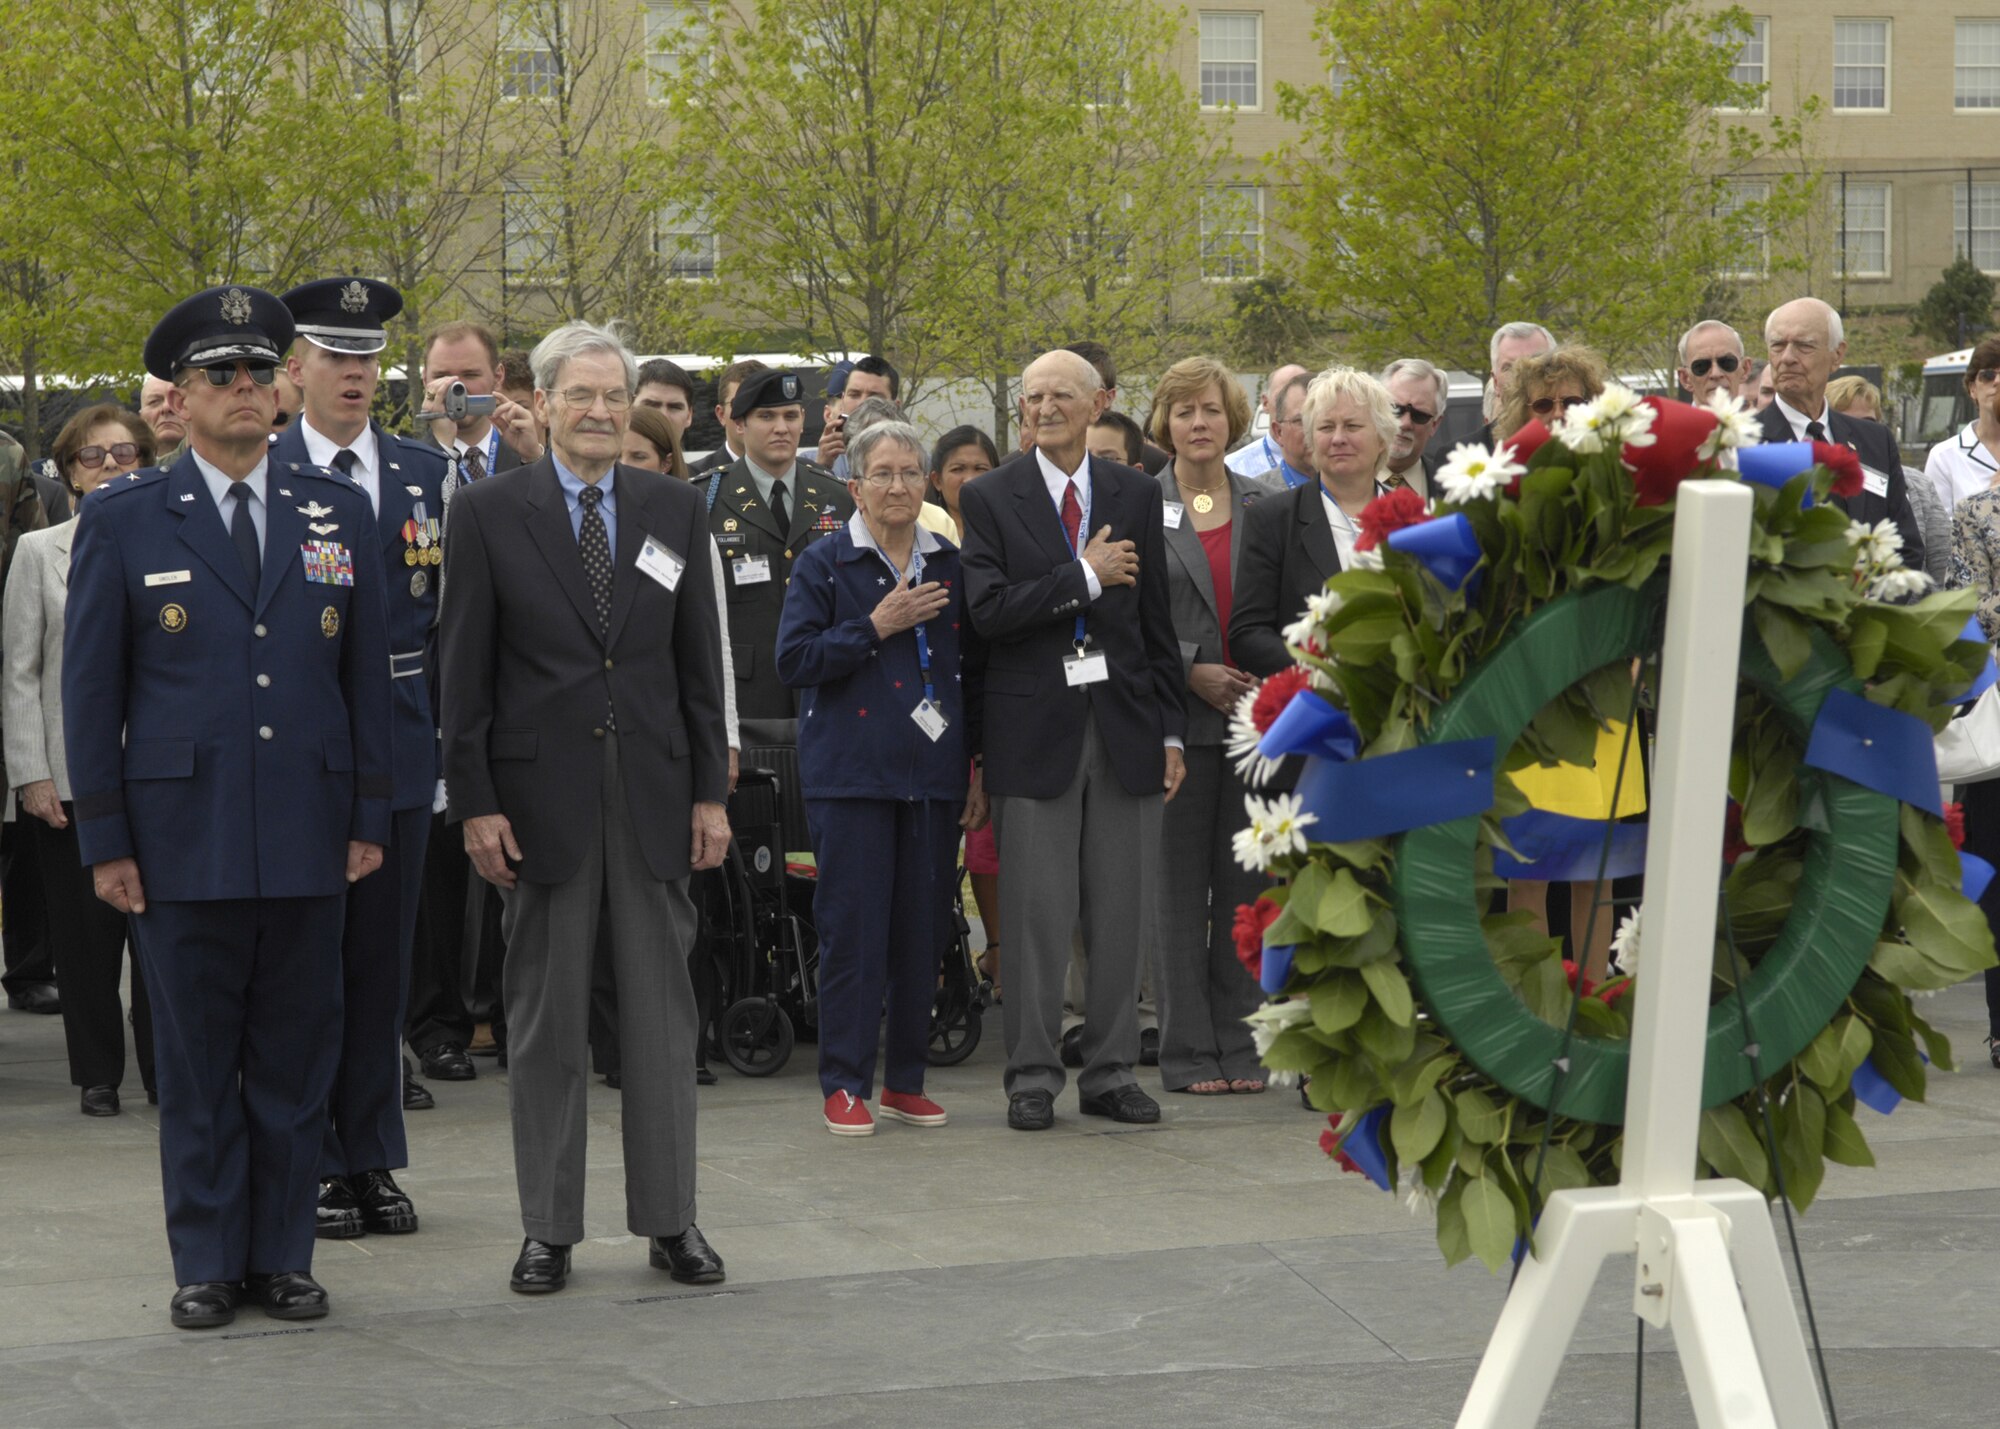 Maj. Gen. Robert L. Smolen, Air Force District of Washington commander, hosts the Air Force Wreath Laying Ceremony in honor of the Flak Man crew at the Air Force Memorial, Arlington, Va., April 24. The wreath was placed by Edward McNally, the Bombardier of the B-24 Bomber, The Flak Man, in honor of the former crew members of the Flak Man who dedicated their lives to the cause of freedom. (U.S. Air Force photo by Senior Airman Rusti Caraker)  